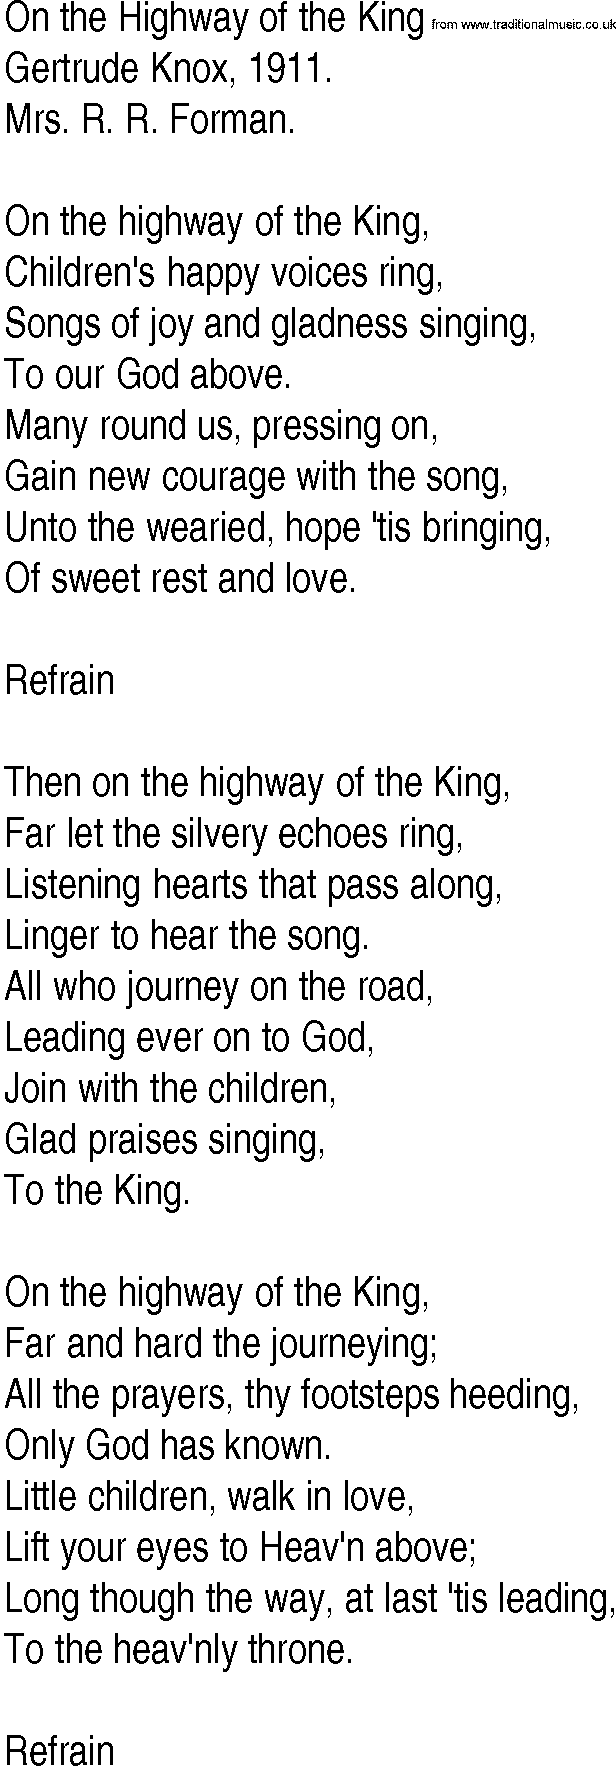 Hymn and Gospel Song: On the Highway of the King by Gertrude Knox lyrics